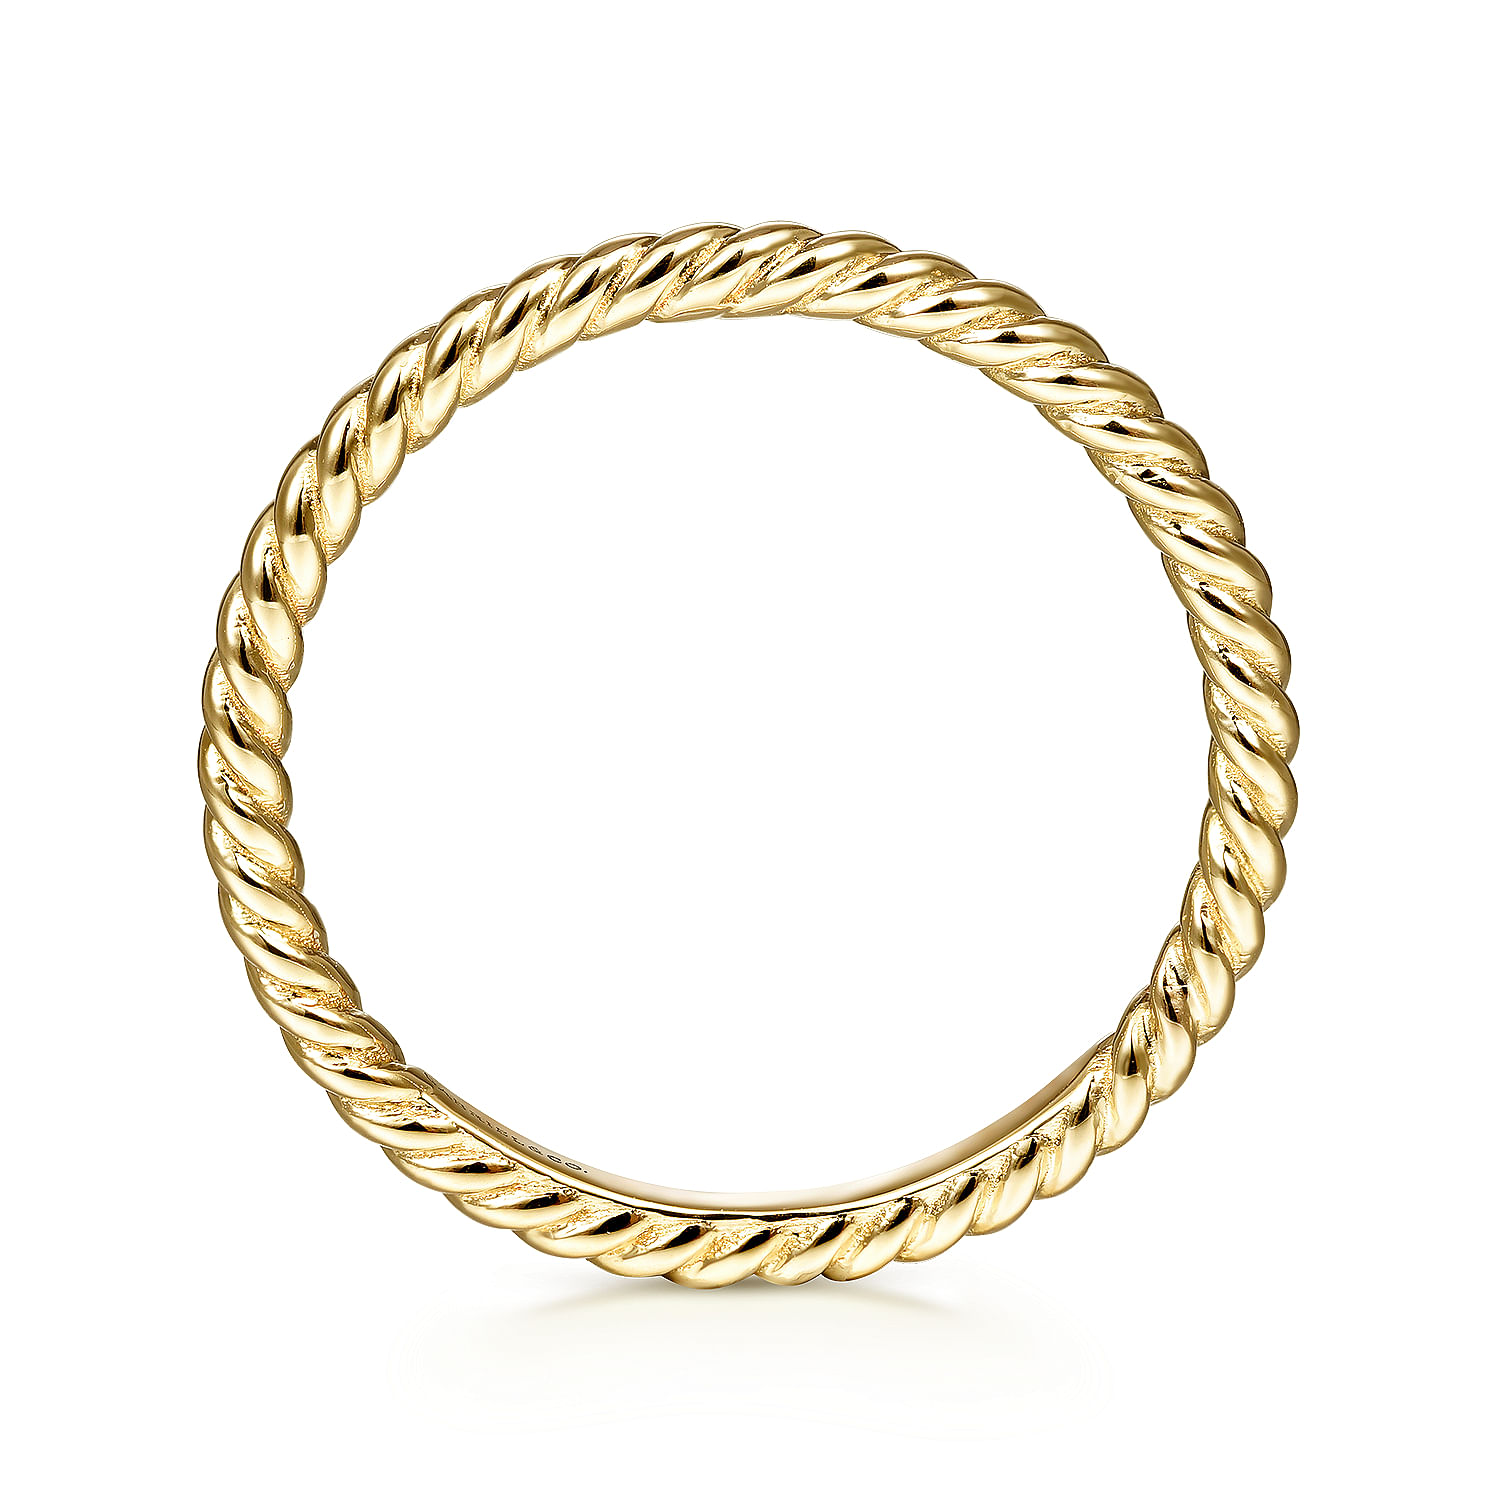 14K Yellow Gold Twisted Rope Stackable Ring